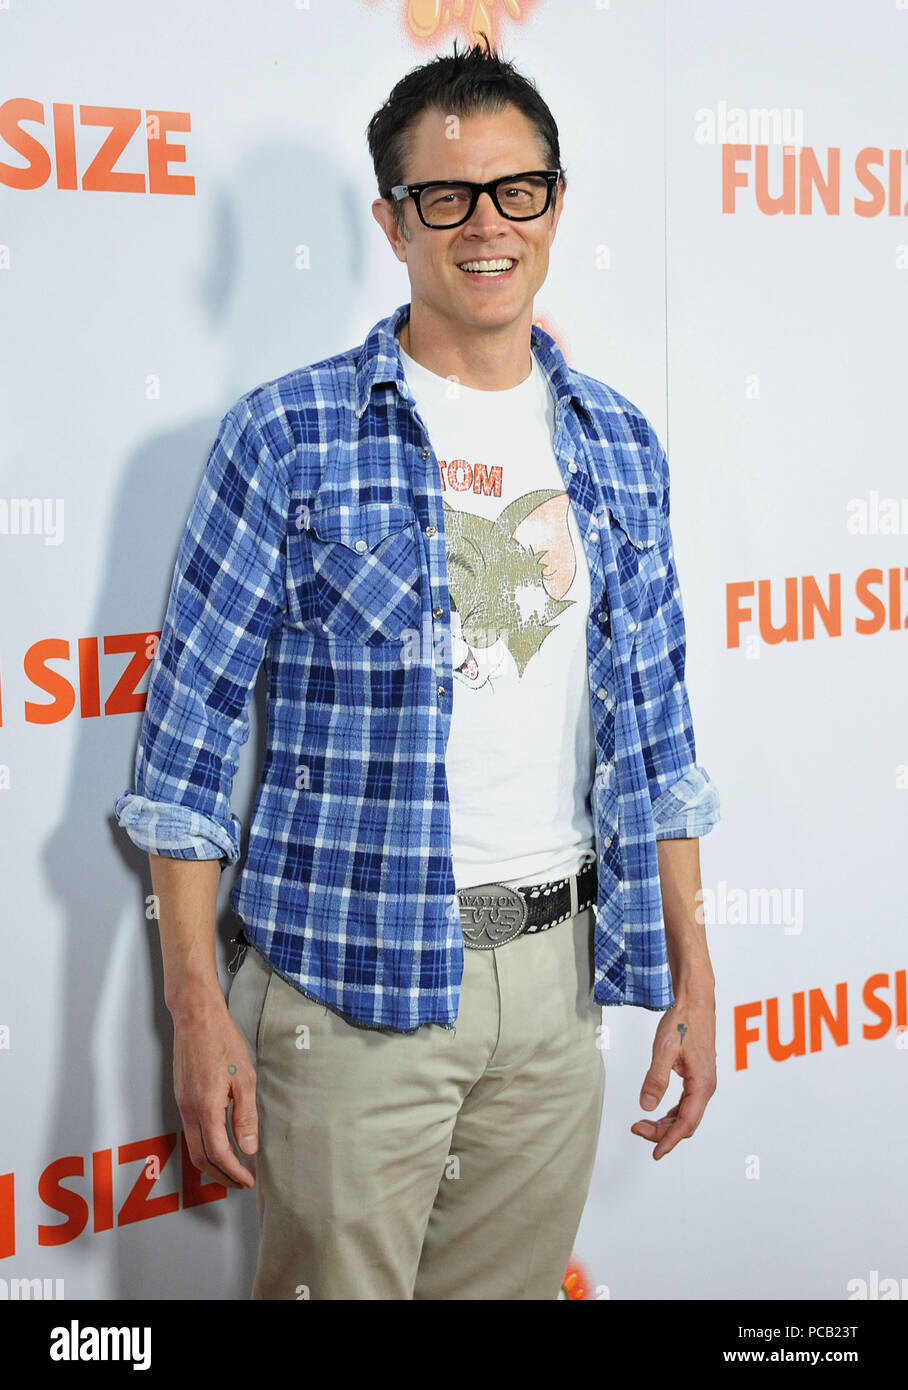 Johnny Knoxville at the Fun Size Premiere at the Paramount studio Theatre in Los Angeles.a Johnny Knoxville  37 ------------- Red Carpet Event, Vertical, USA, Film Industry, Celebrities,  Photography, Bestof, Arts Culture and Entertainment, Topix Celebrities fashion /  Vertical, Best of, Event in Hollywood Life - California,  Red Carpet and backstage, USA, Film Industry, Celebrities,  movie celebrities, TV celebrities, Music celebrities, Photography, Bestof, Arts Culture and Entertainment,  Topix, Three Quarters, vertical, one person,, from the year , 2012, inquiry tsuni@Gamma-USA.com Stock Photo